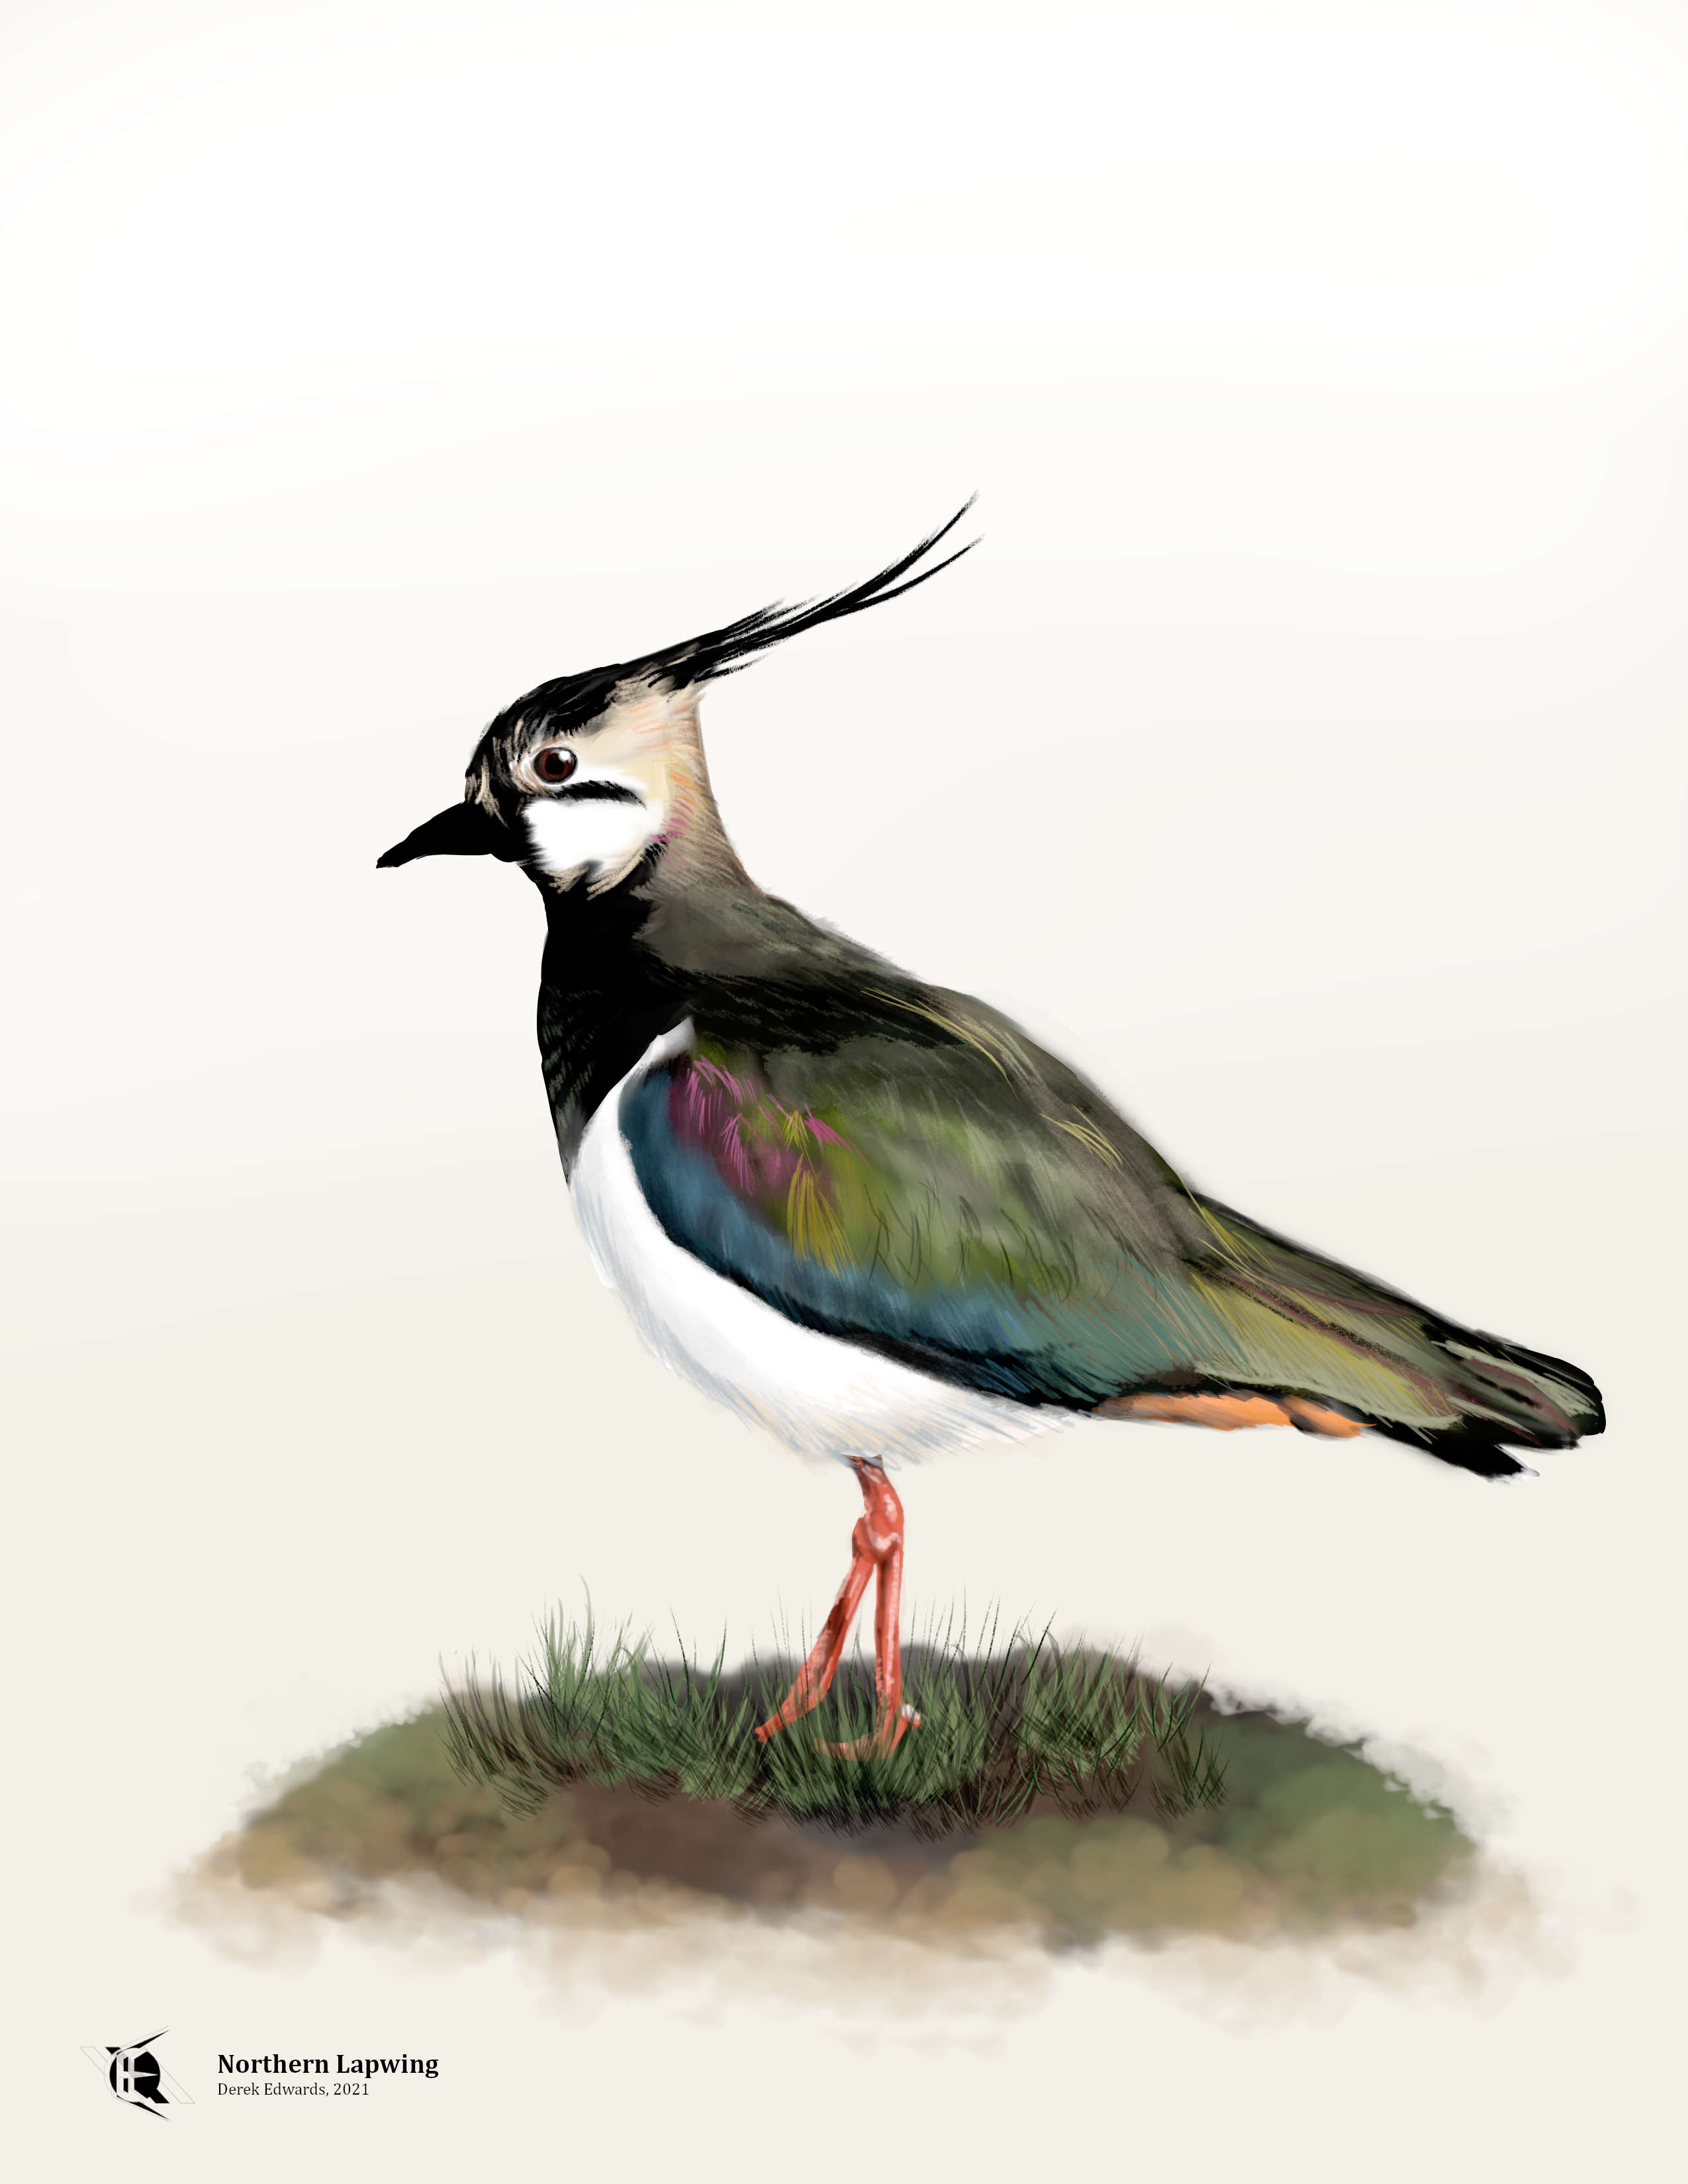 https://s3-us-west-2.amazonaws.com/secure.notion-static.com/b3455857-6f53-4358-b797-69789a022b19/Northern_Lapwing.png